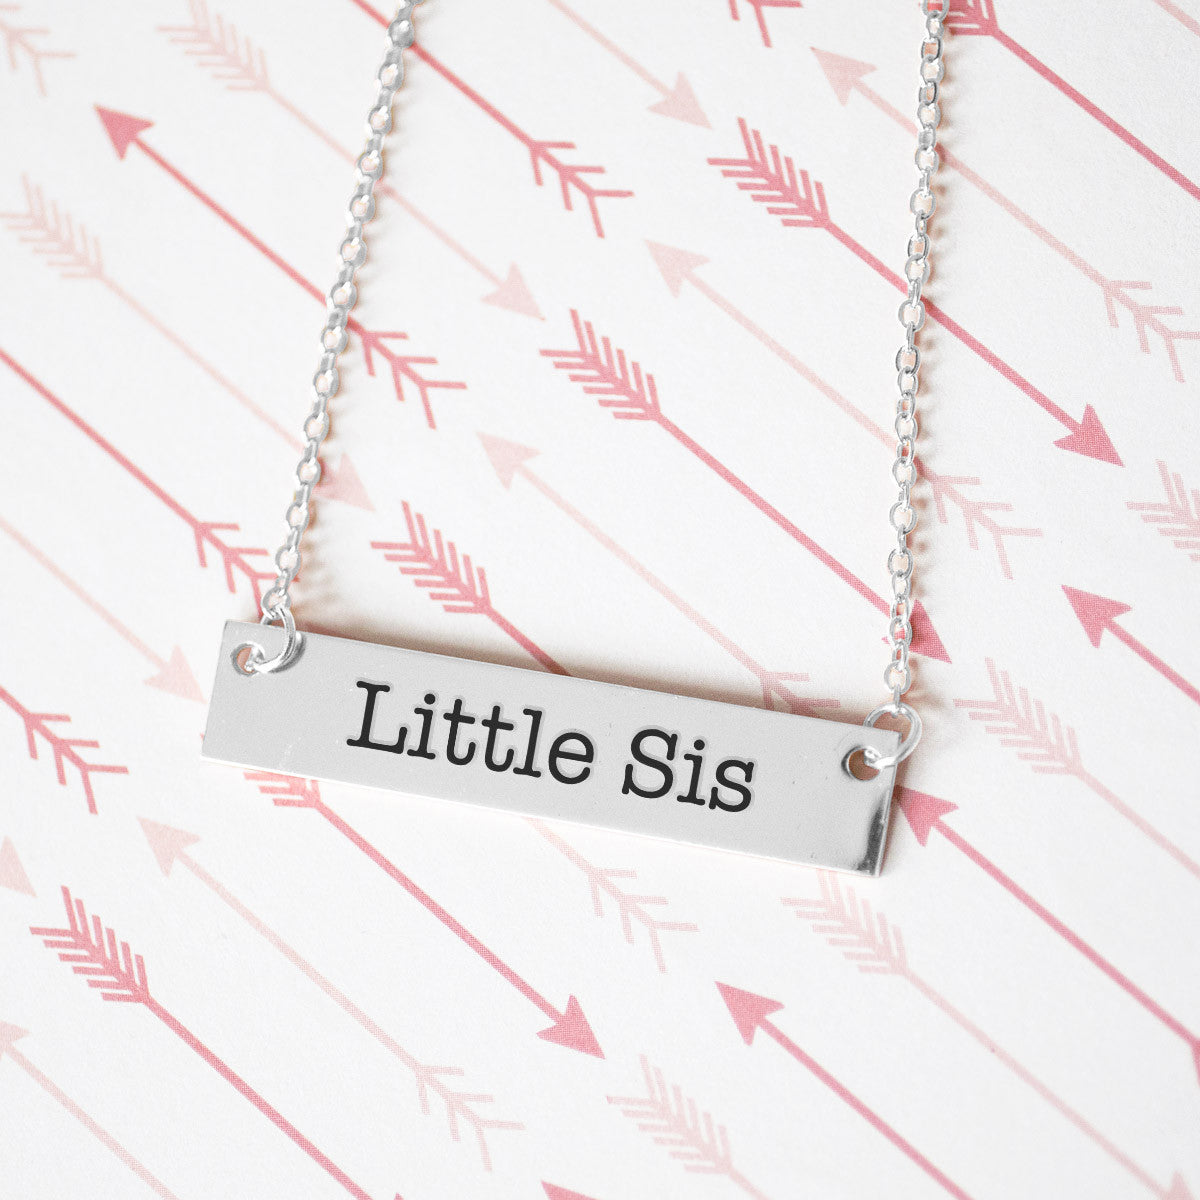 Little Sister Gold / Silver Bar Necklace - Sister Gifts